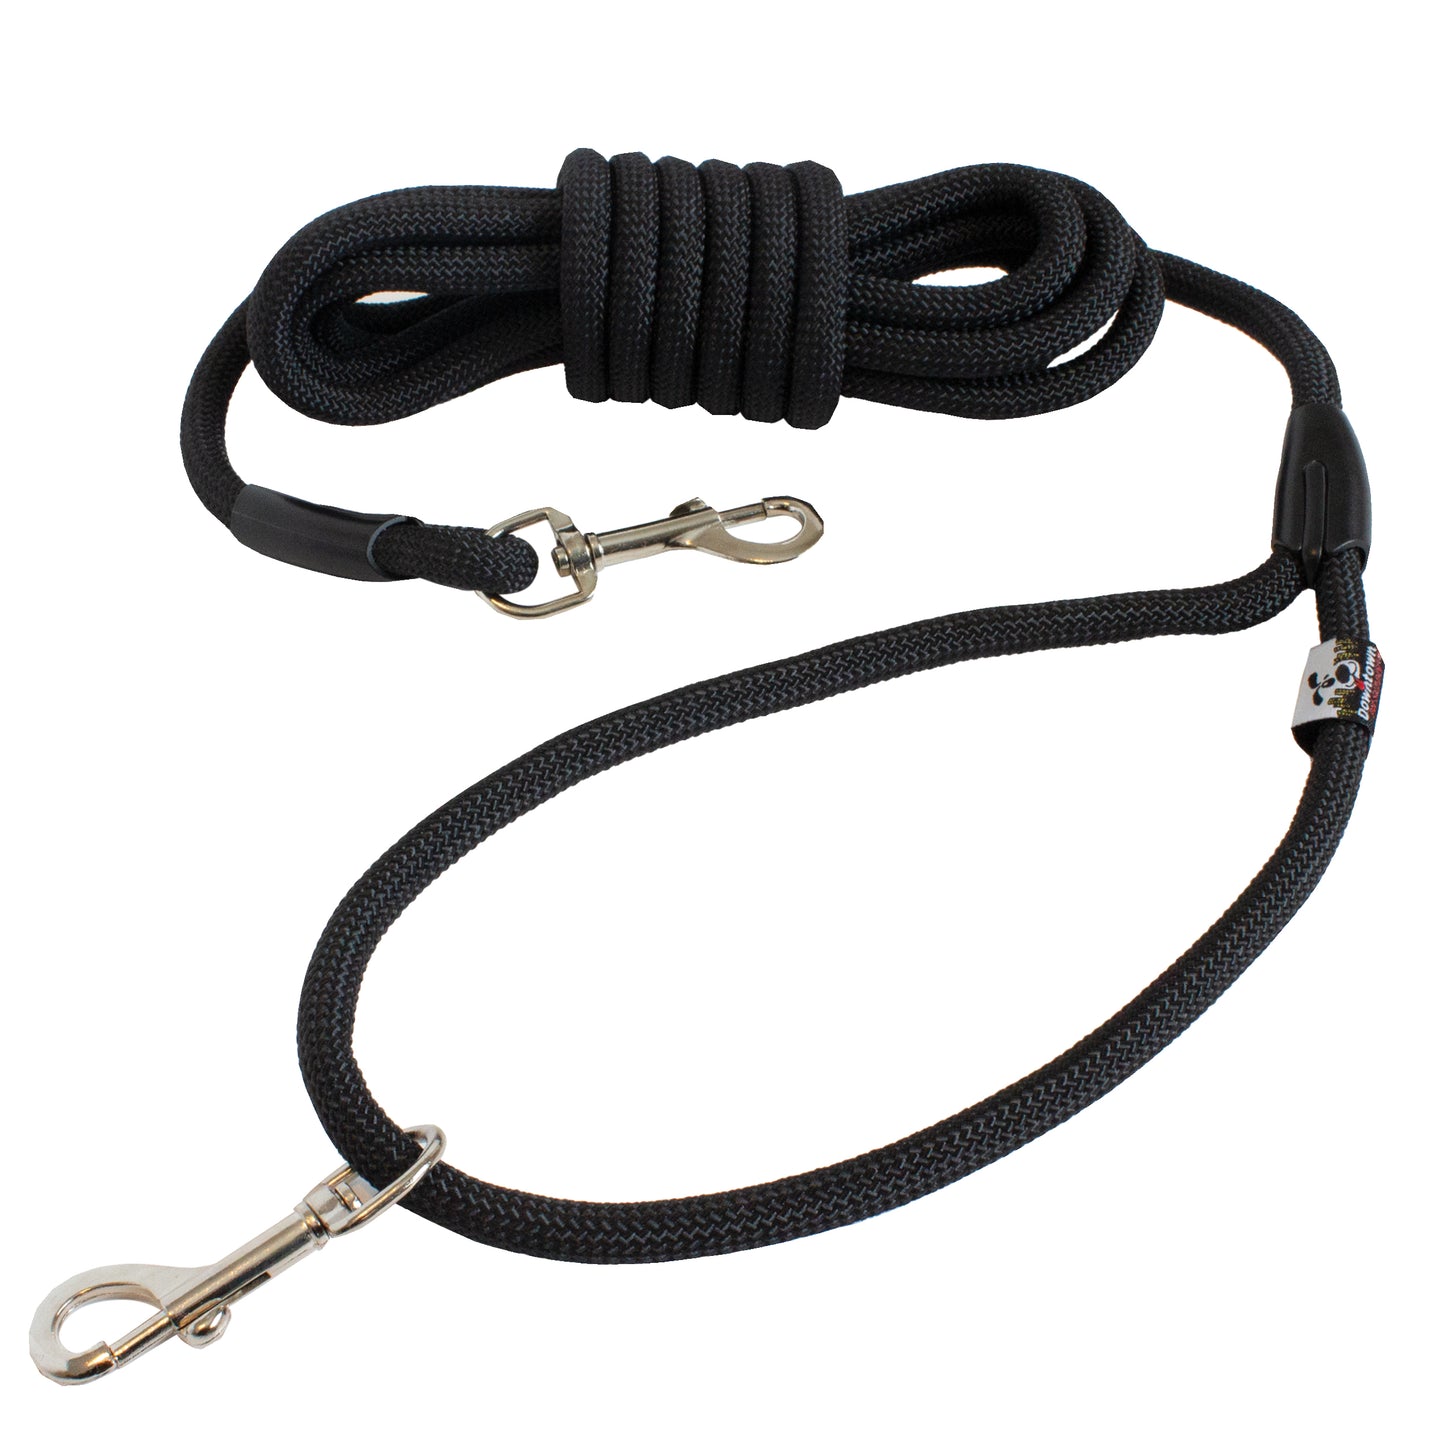 Heavy Duty Corded Dog Leash - Multi-Size and Color Options